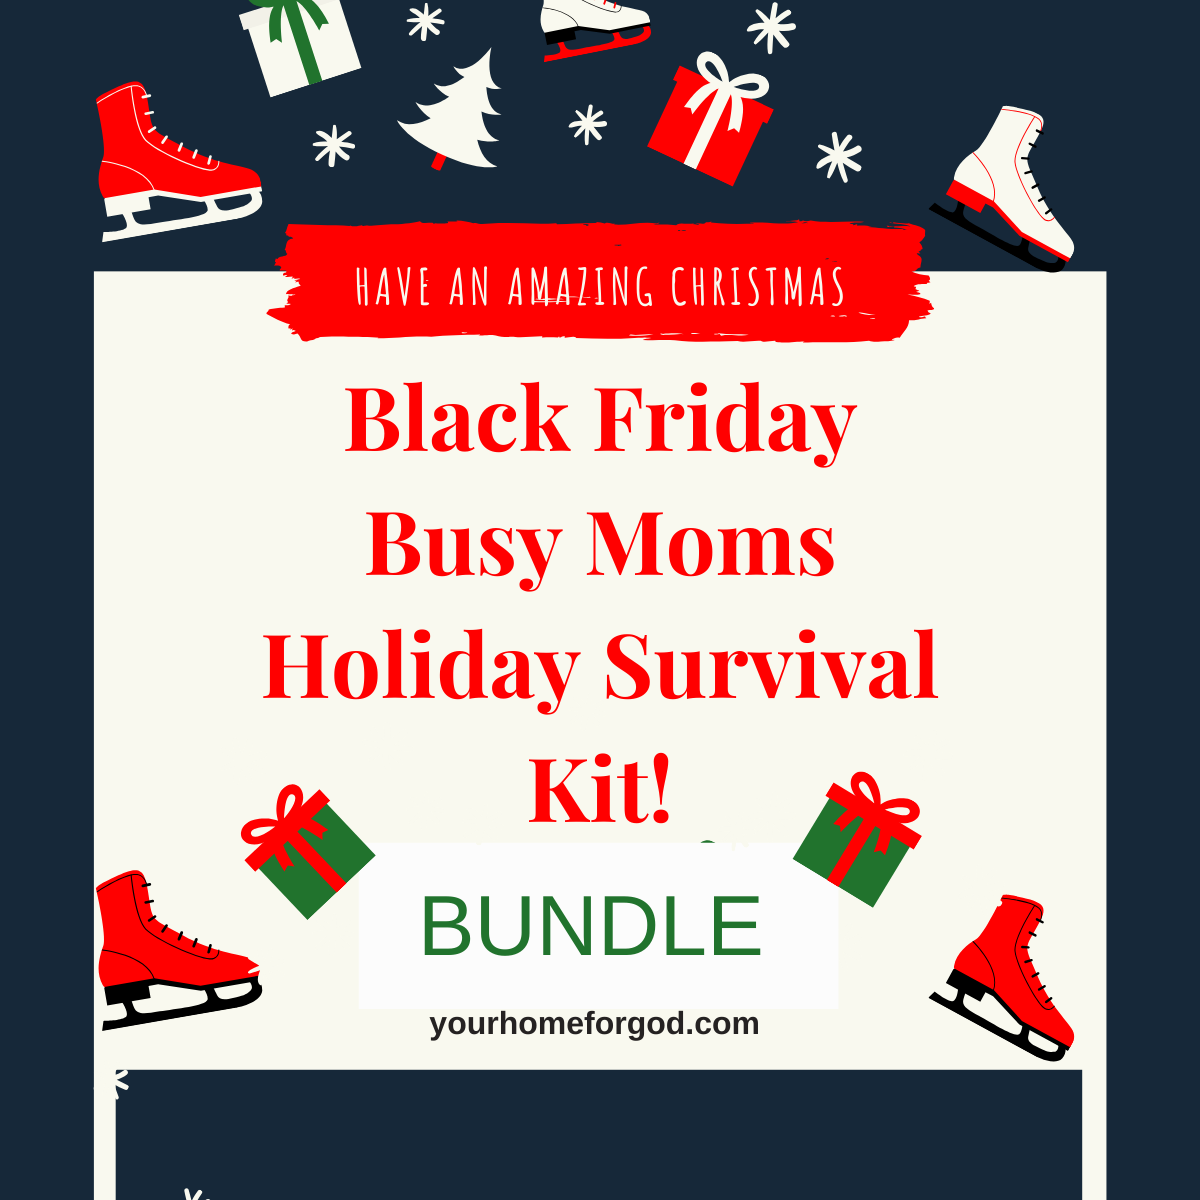 Your Home For God, black-friday-busy-moms-holiday-survival-kit-bundle